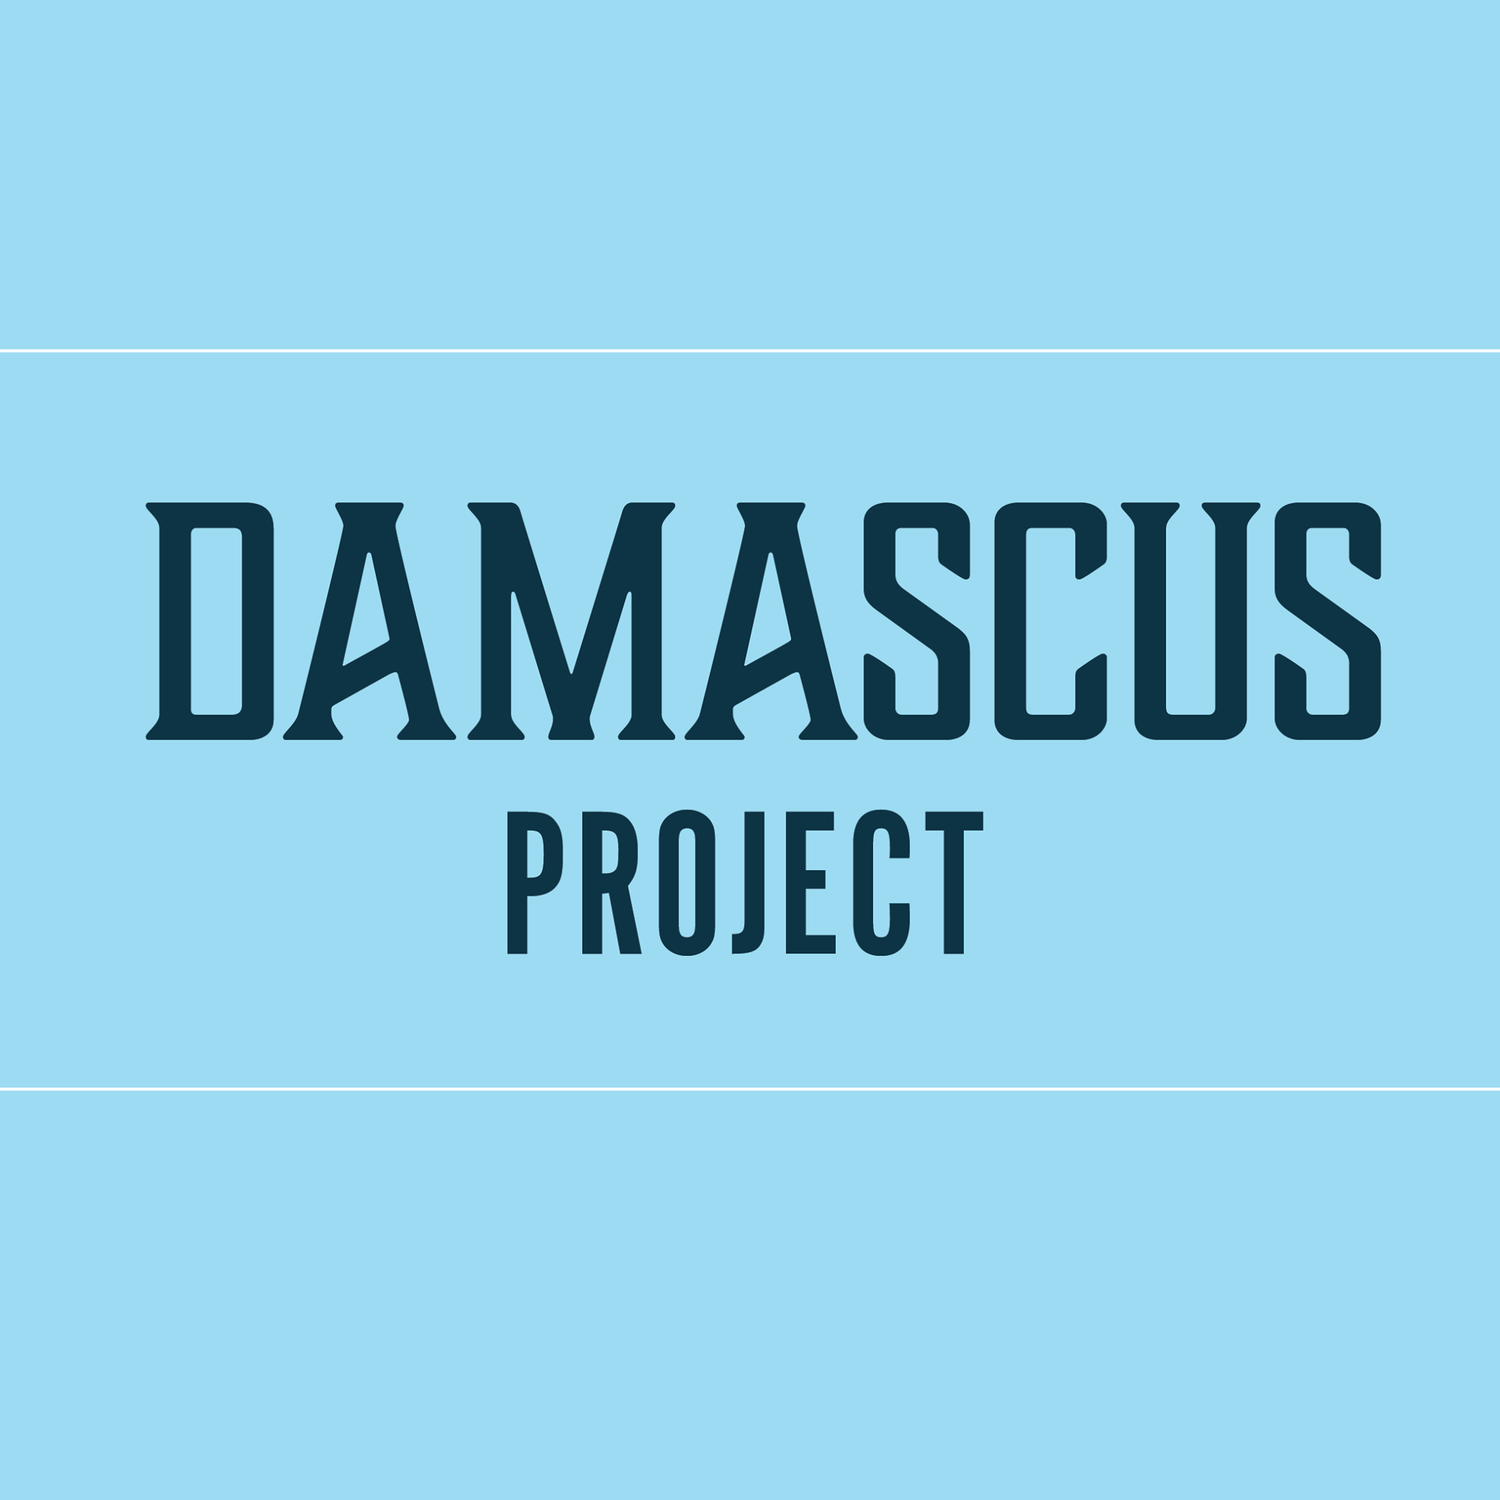 The Damascus Project